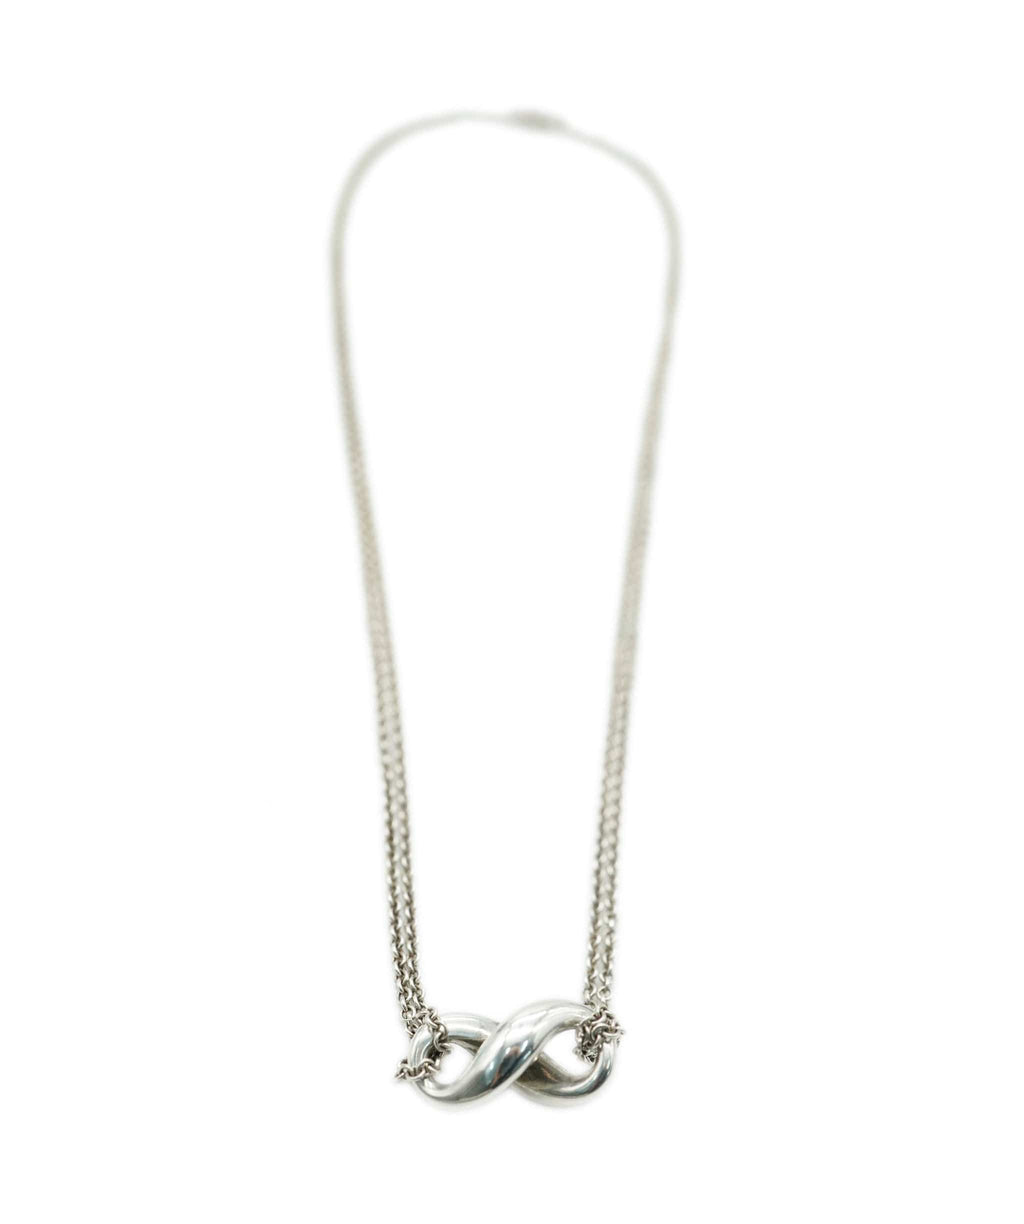 Tiffany & Co. | Jewelry | Tiffany Co Infinity Necklace In Sterling Silver |  Poshmark